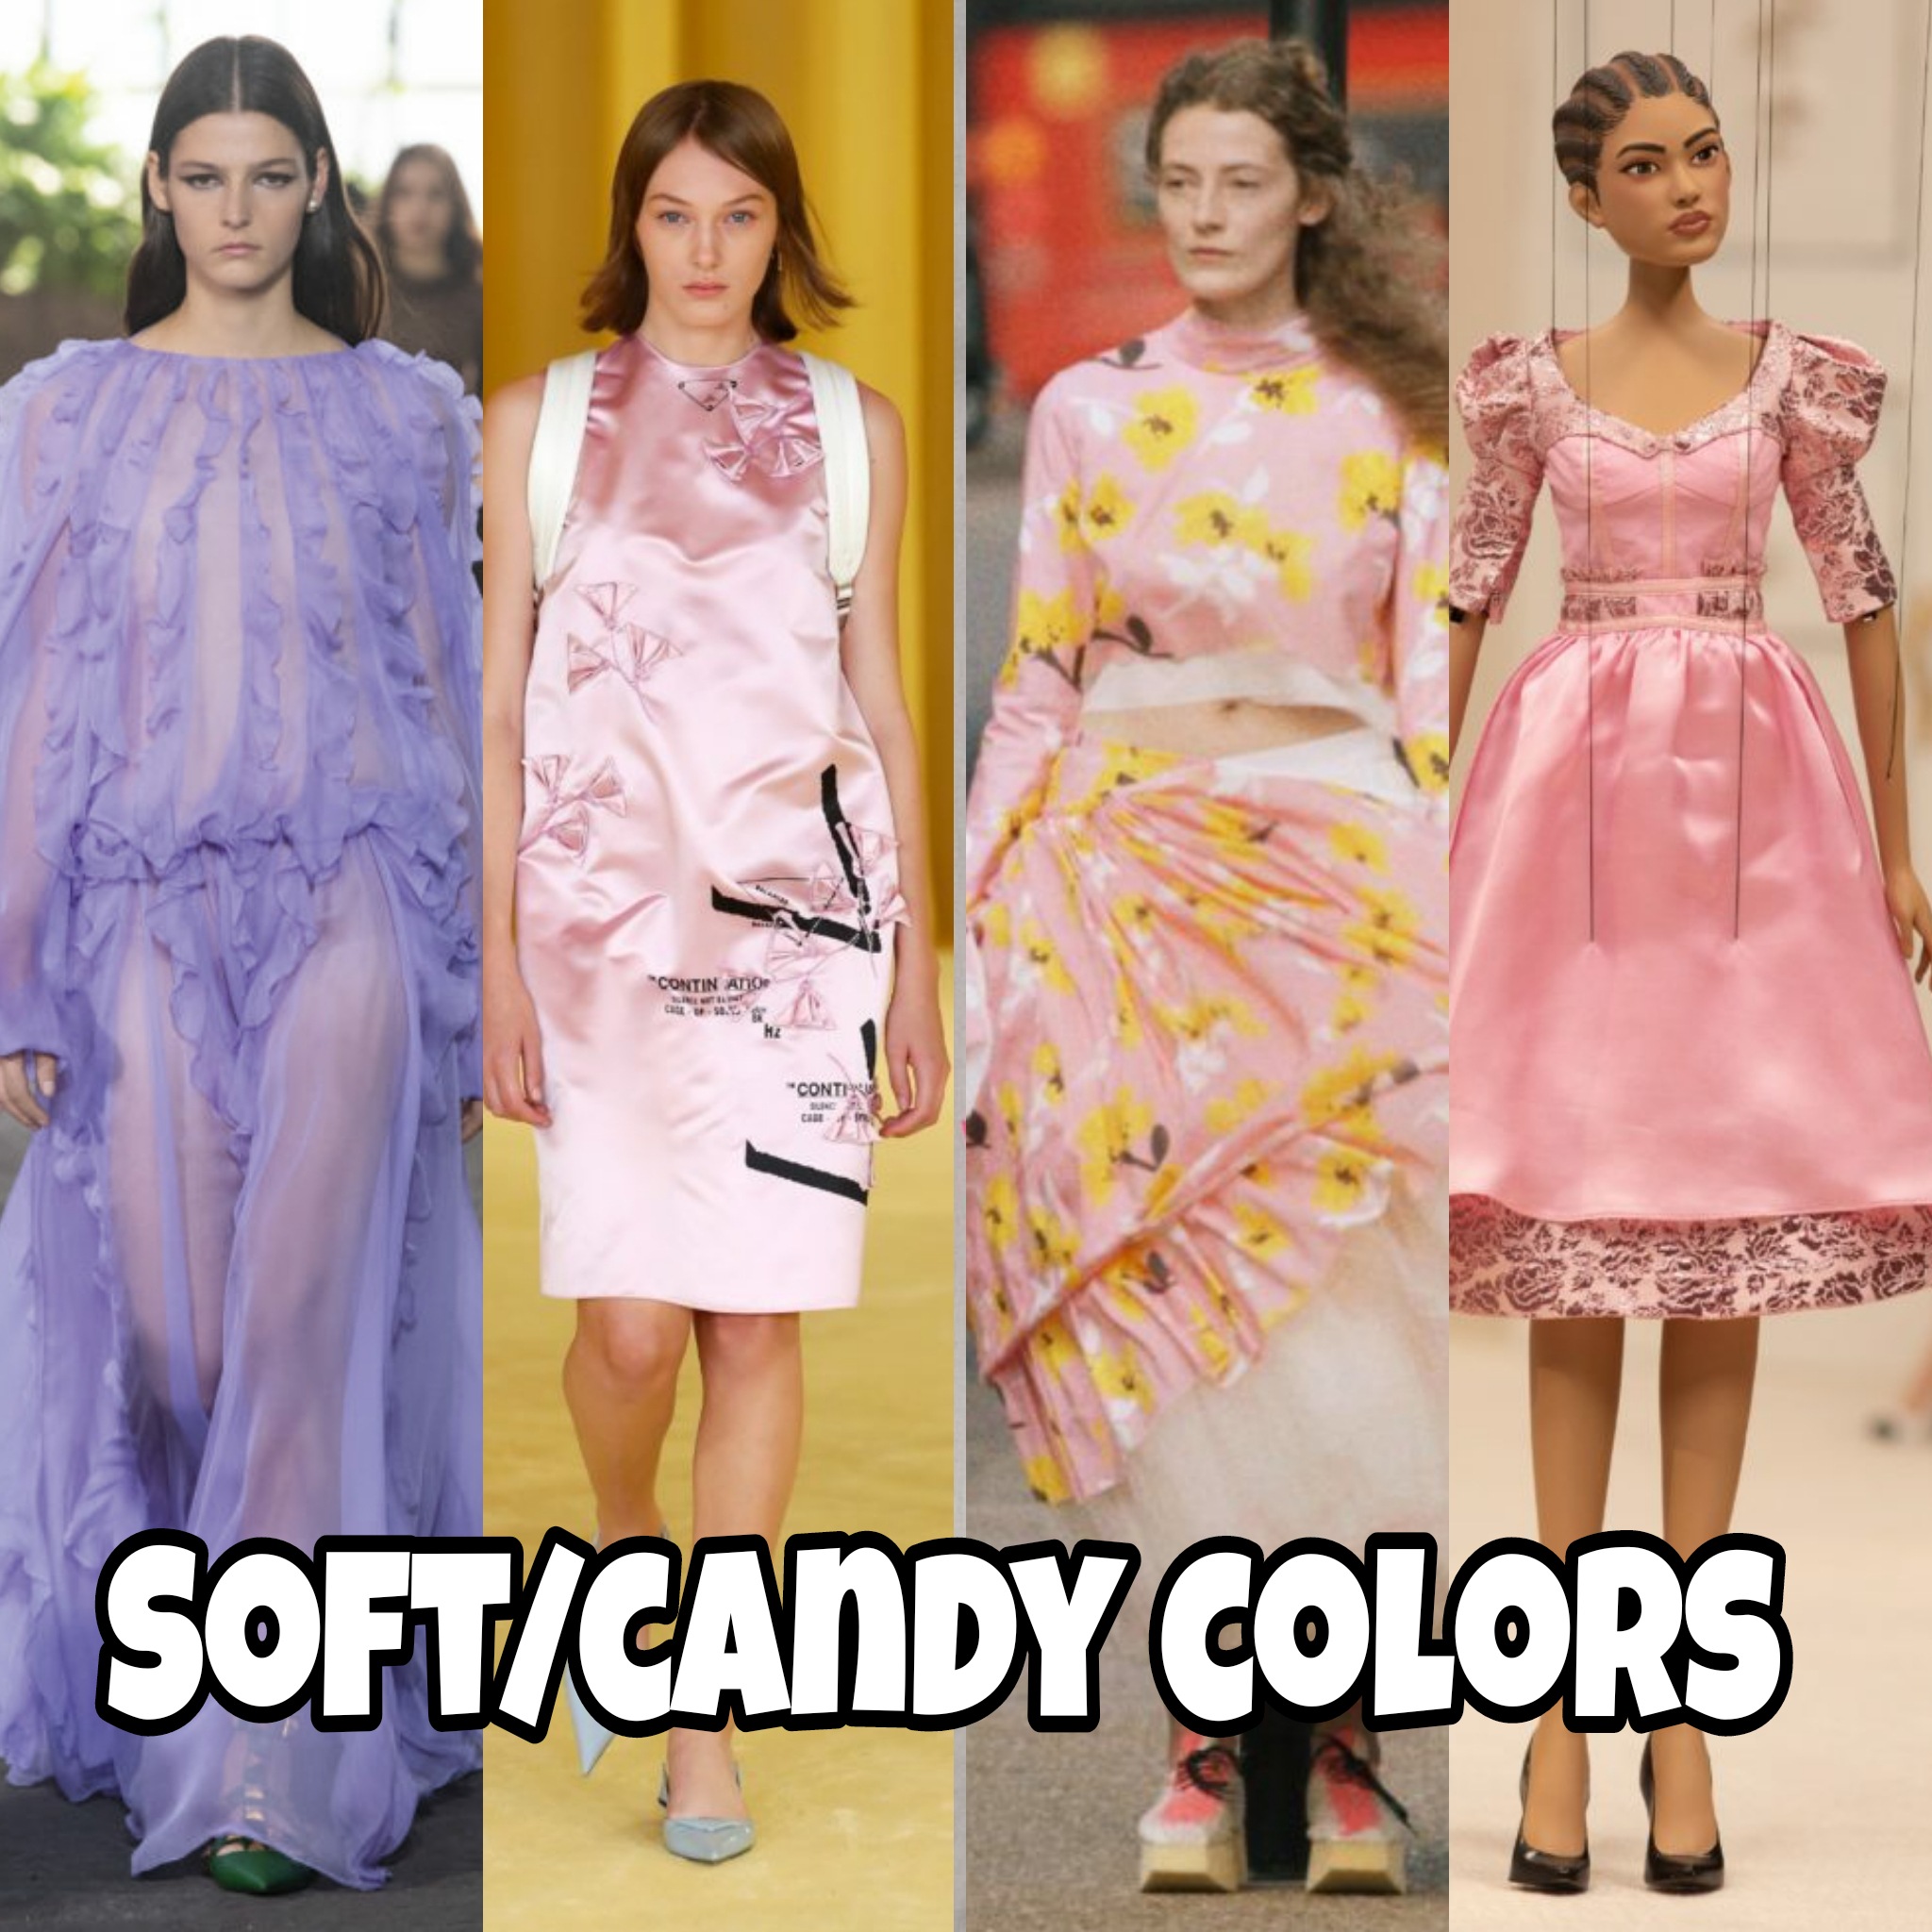 Soft/Candy Colors